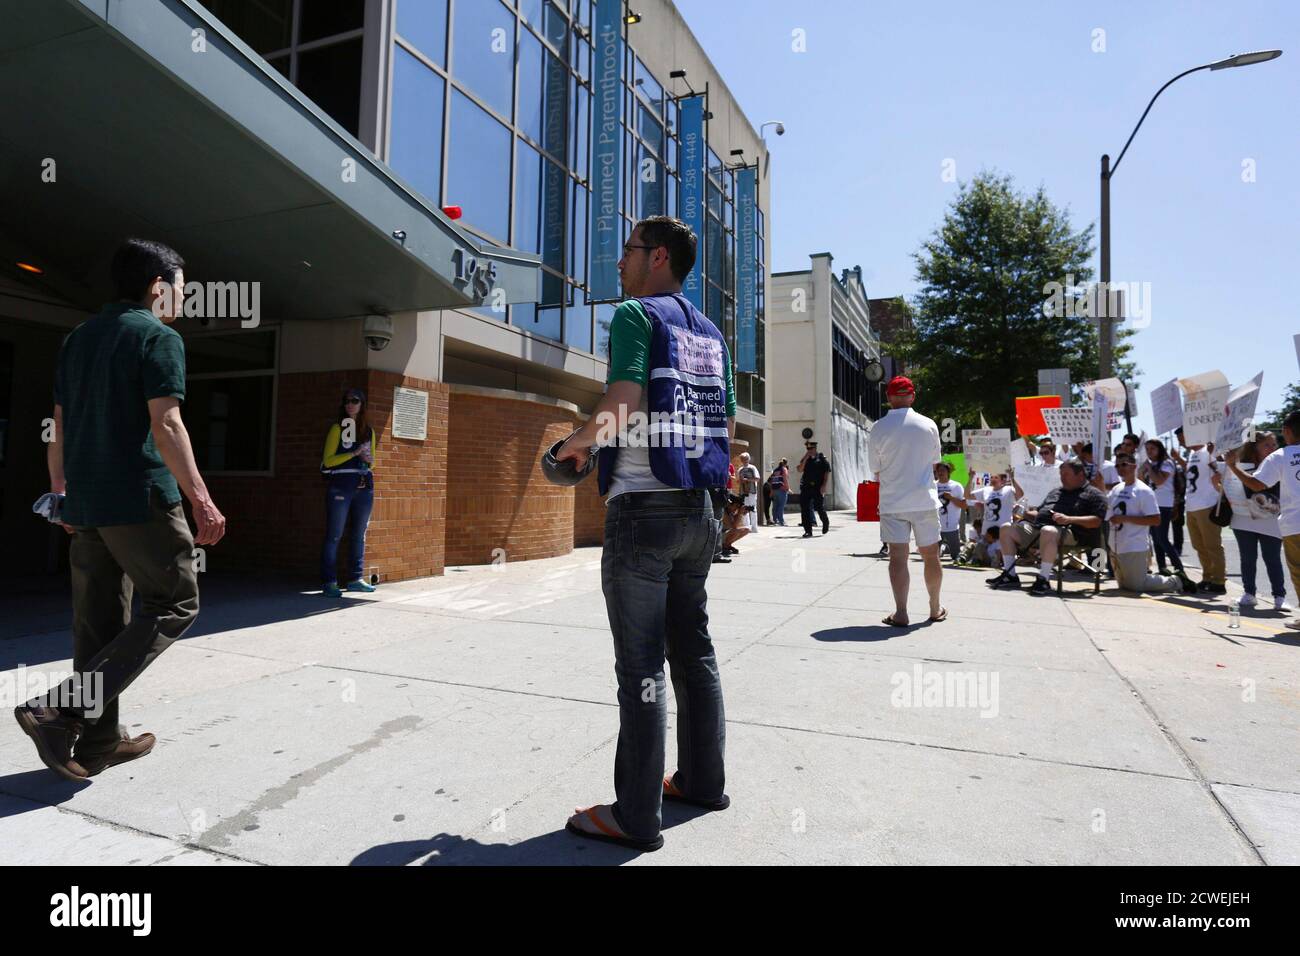 A volunteer stands near abortion protesters in front of a Planned Parenthood clinic in Boston, Massachusetts, June 28, 2014. Massachusetts is beefing up security around abortion clinics and scrambling for a legal fix after the U.S. Supreme Court voided the state's buffer zone law that kept protesters 35 feet away, saying it violated freedom of speech. Boston, Worcester and Springfield, the state's largest cities, have deployed extra police to clinics, and abortion-provider Planned Parenthood said it was training new 'patient escorts' to help women through protests if needed. REUTERS/Dominick R Stock Photo